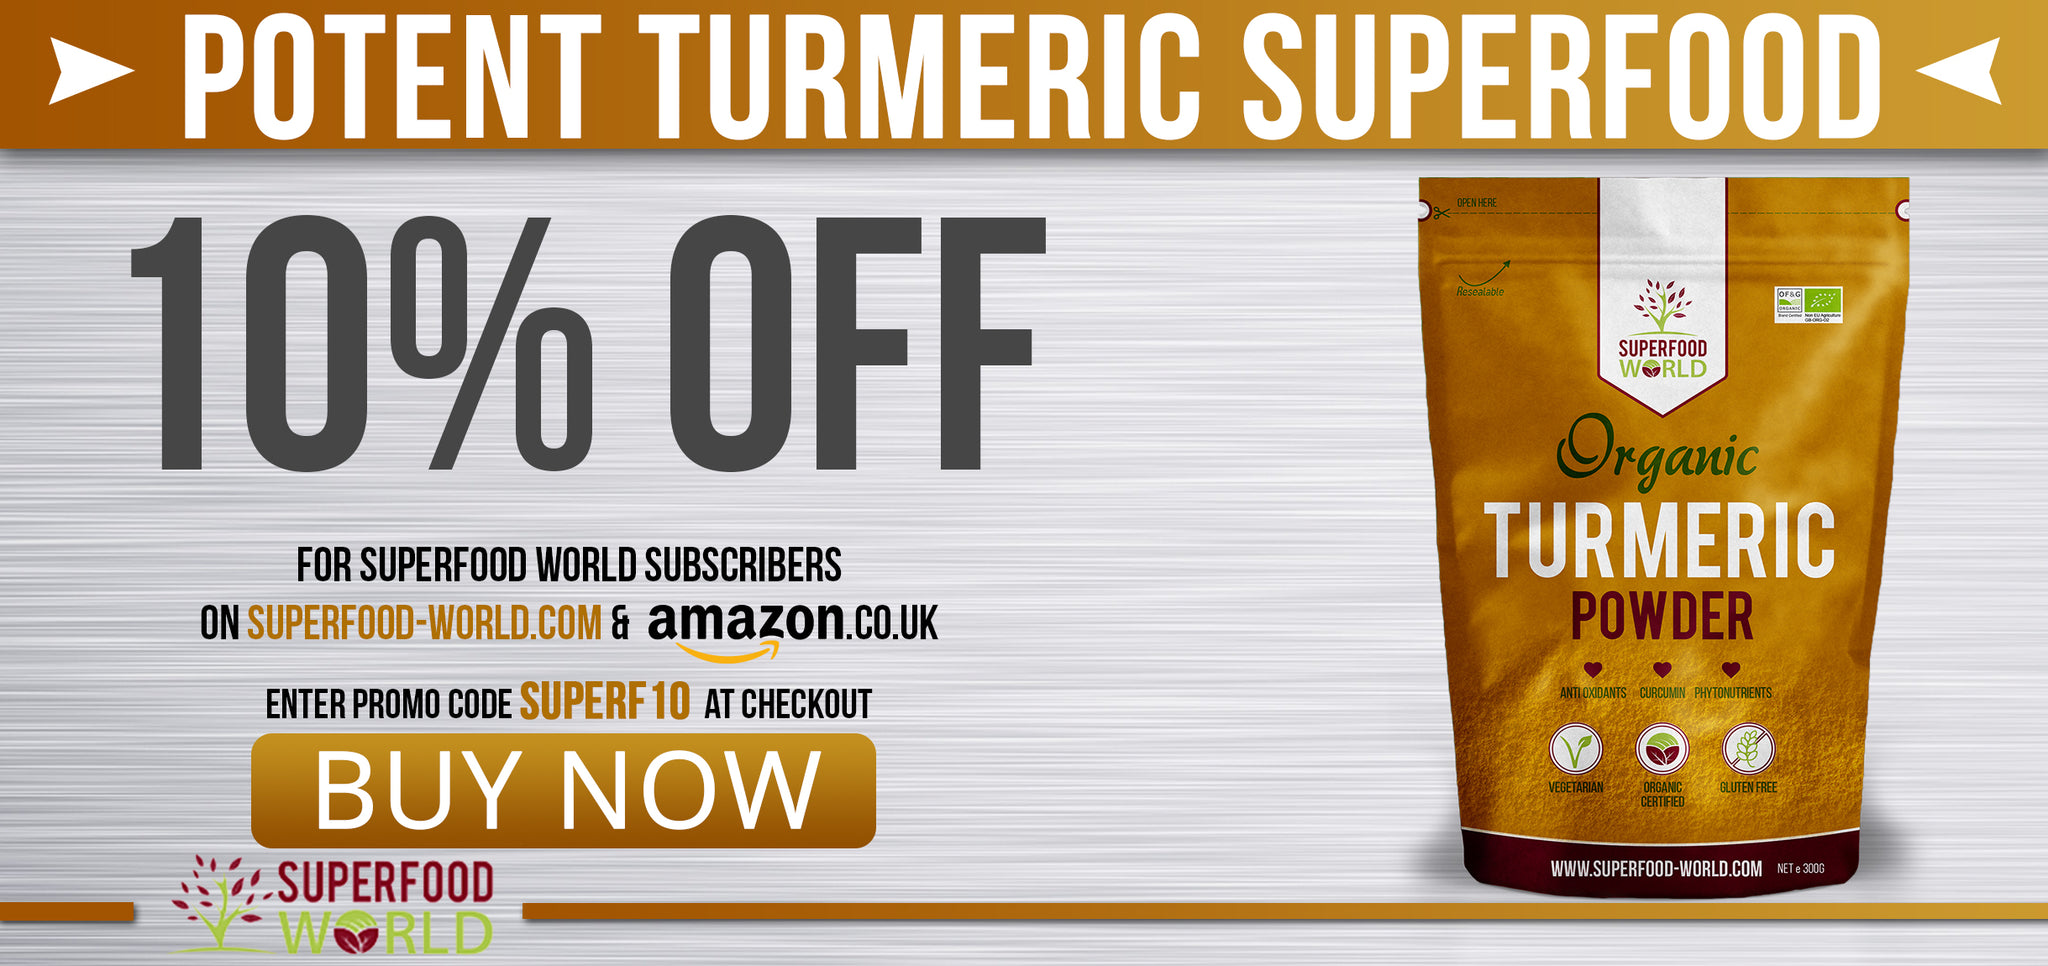 Buy Organic Turmeric Powder from Superfood World Today!